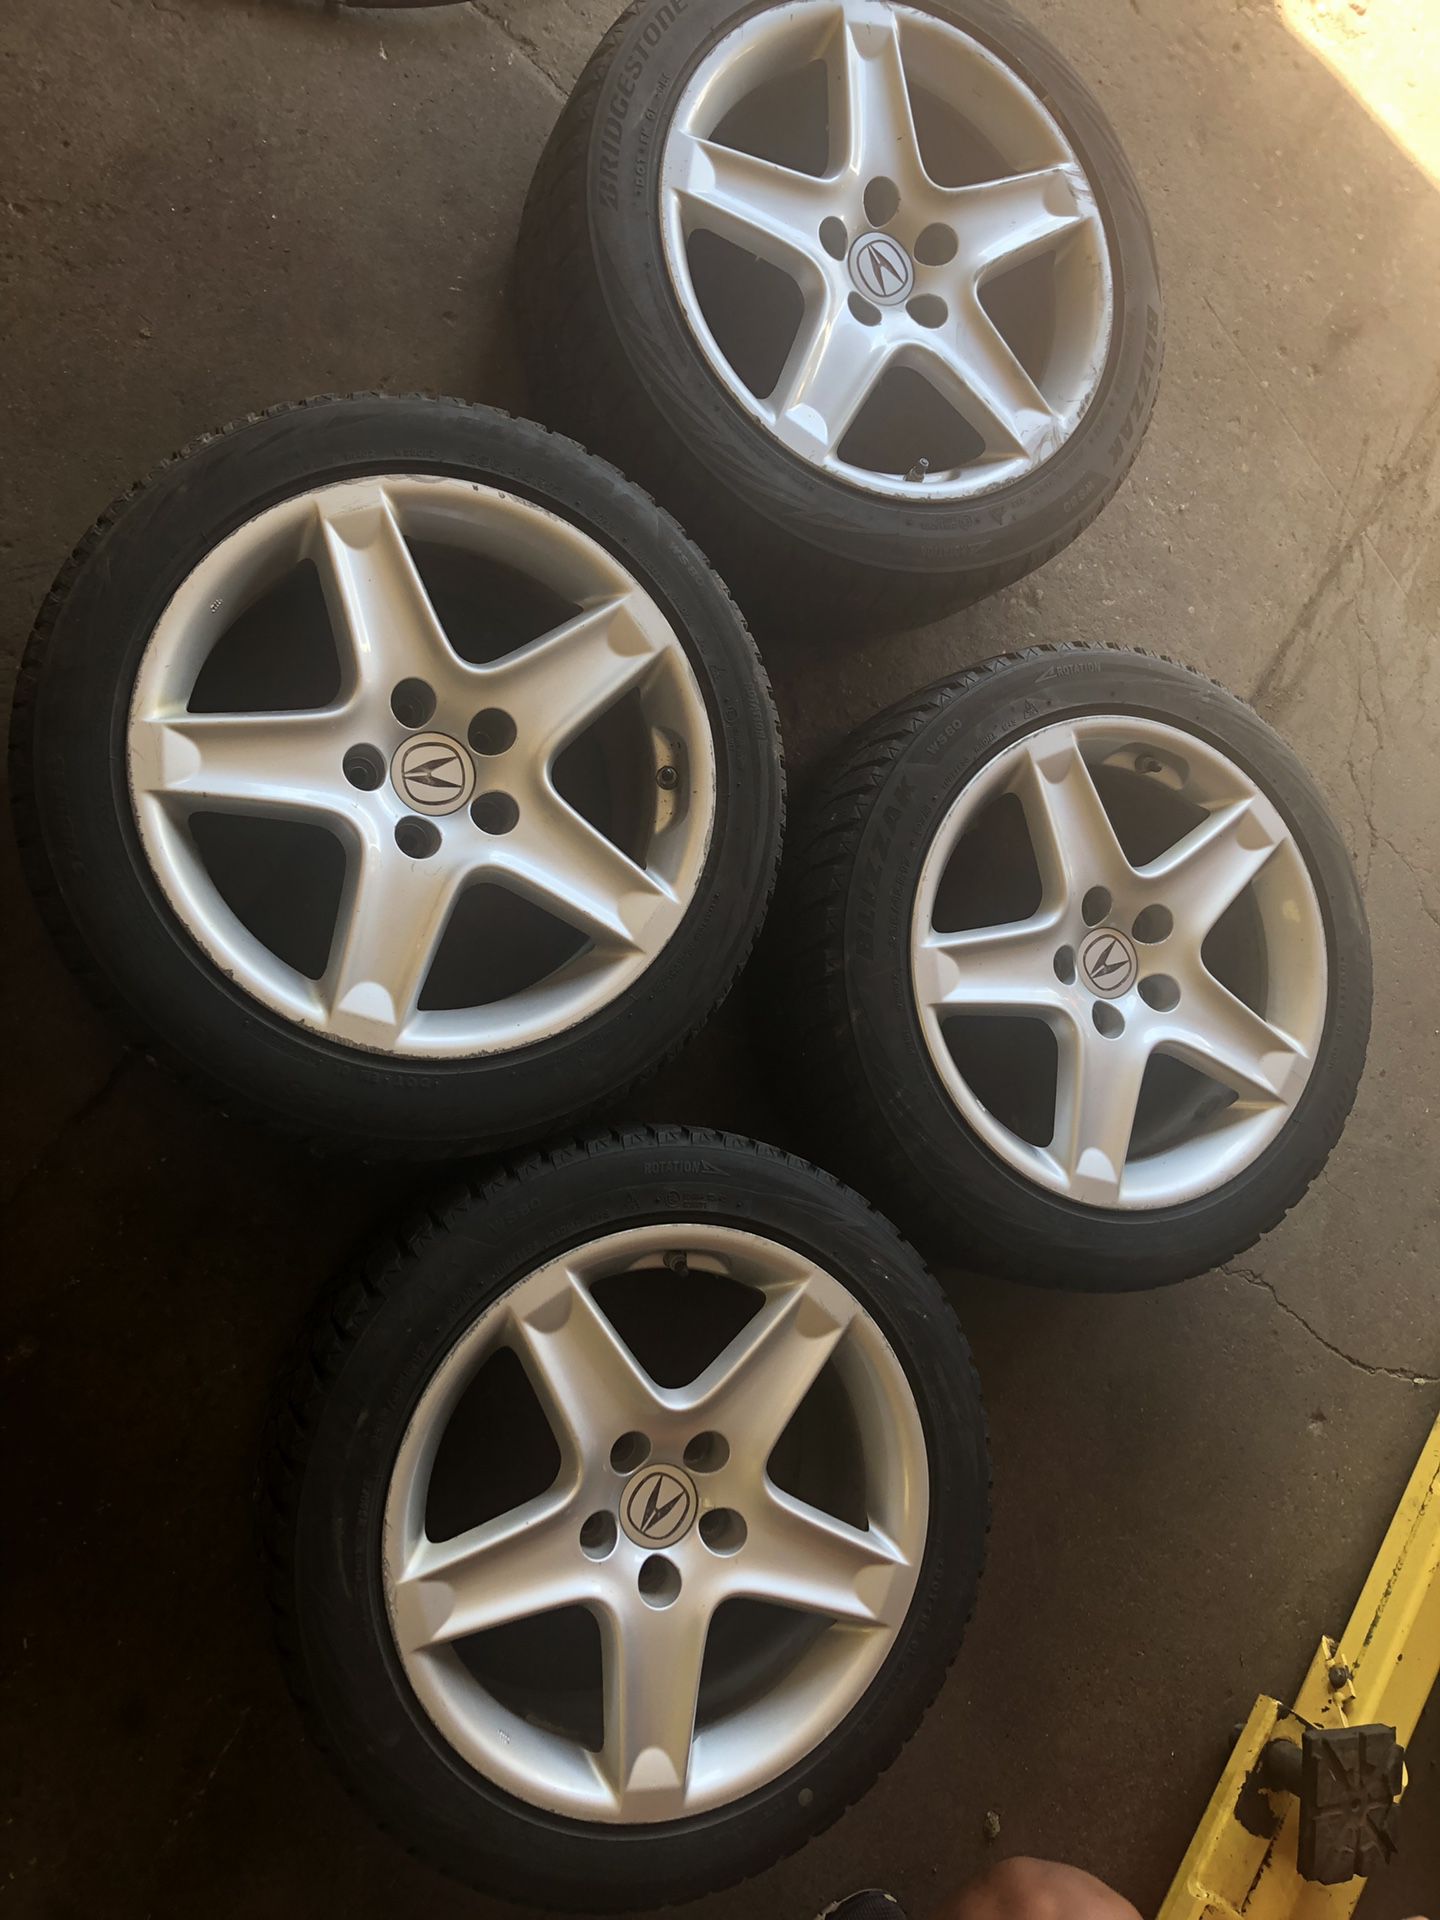 Set of 4 tires and rims for 04 to 08 Acura TL in good shape OBO cash only no trade.